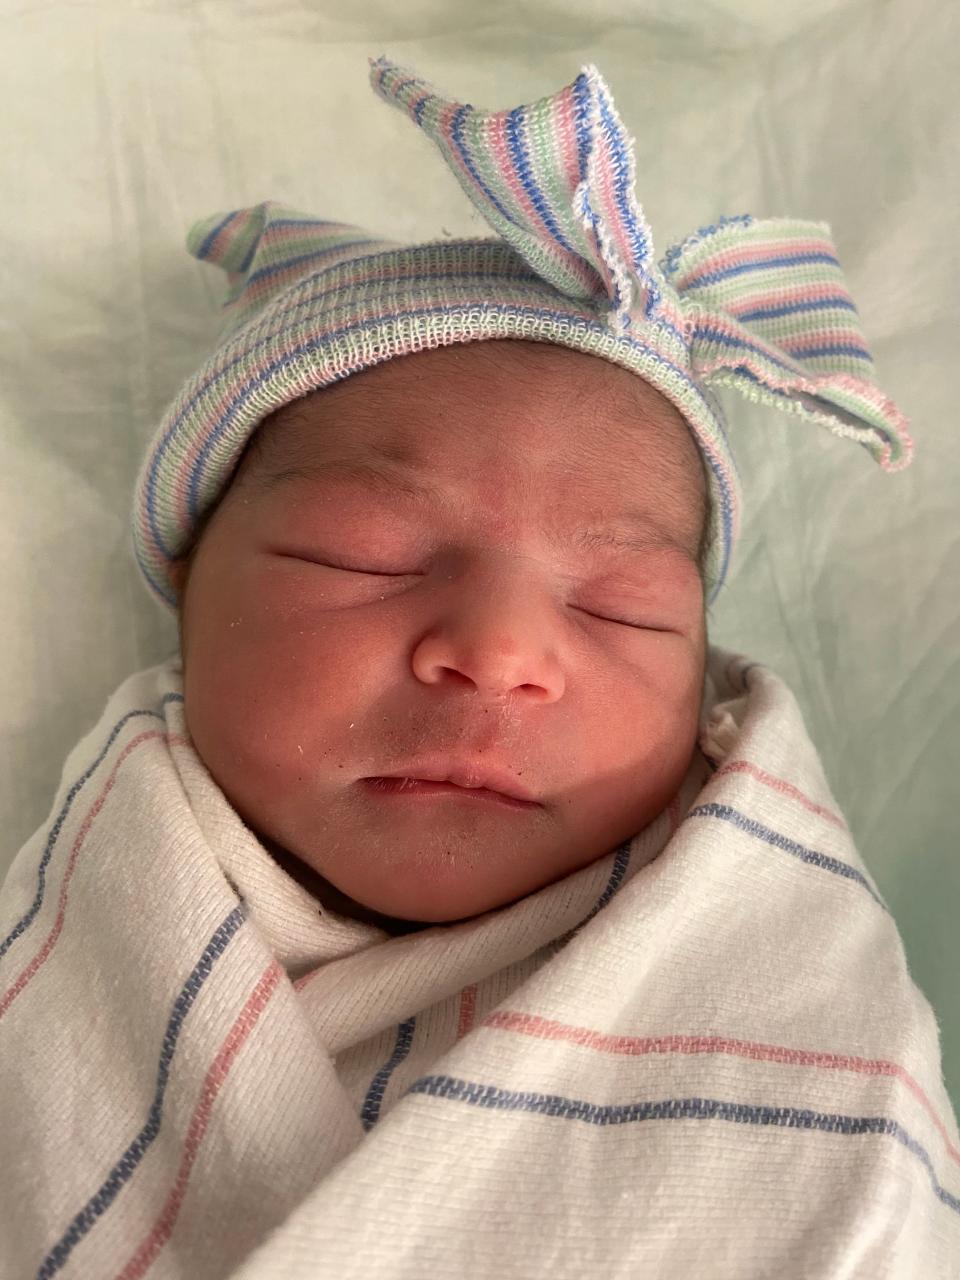 Nicolette Schulz was born at 6:48 a.m. on Jan. 1, 2024 at Community Medical Center in Toms River.